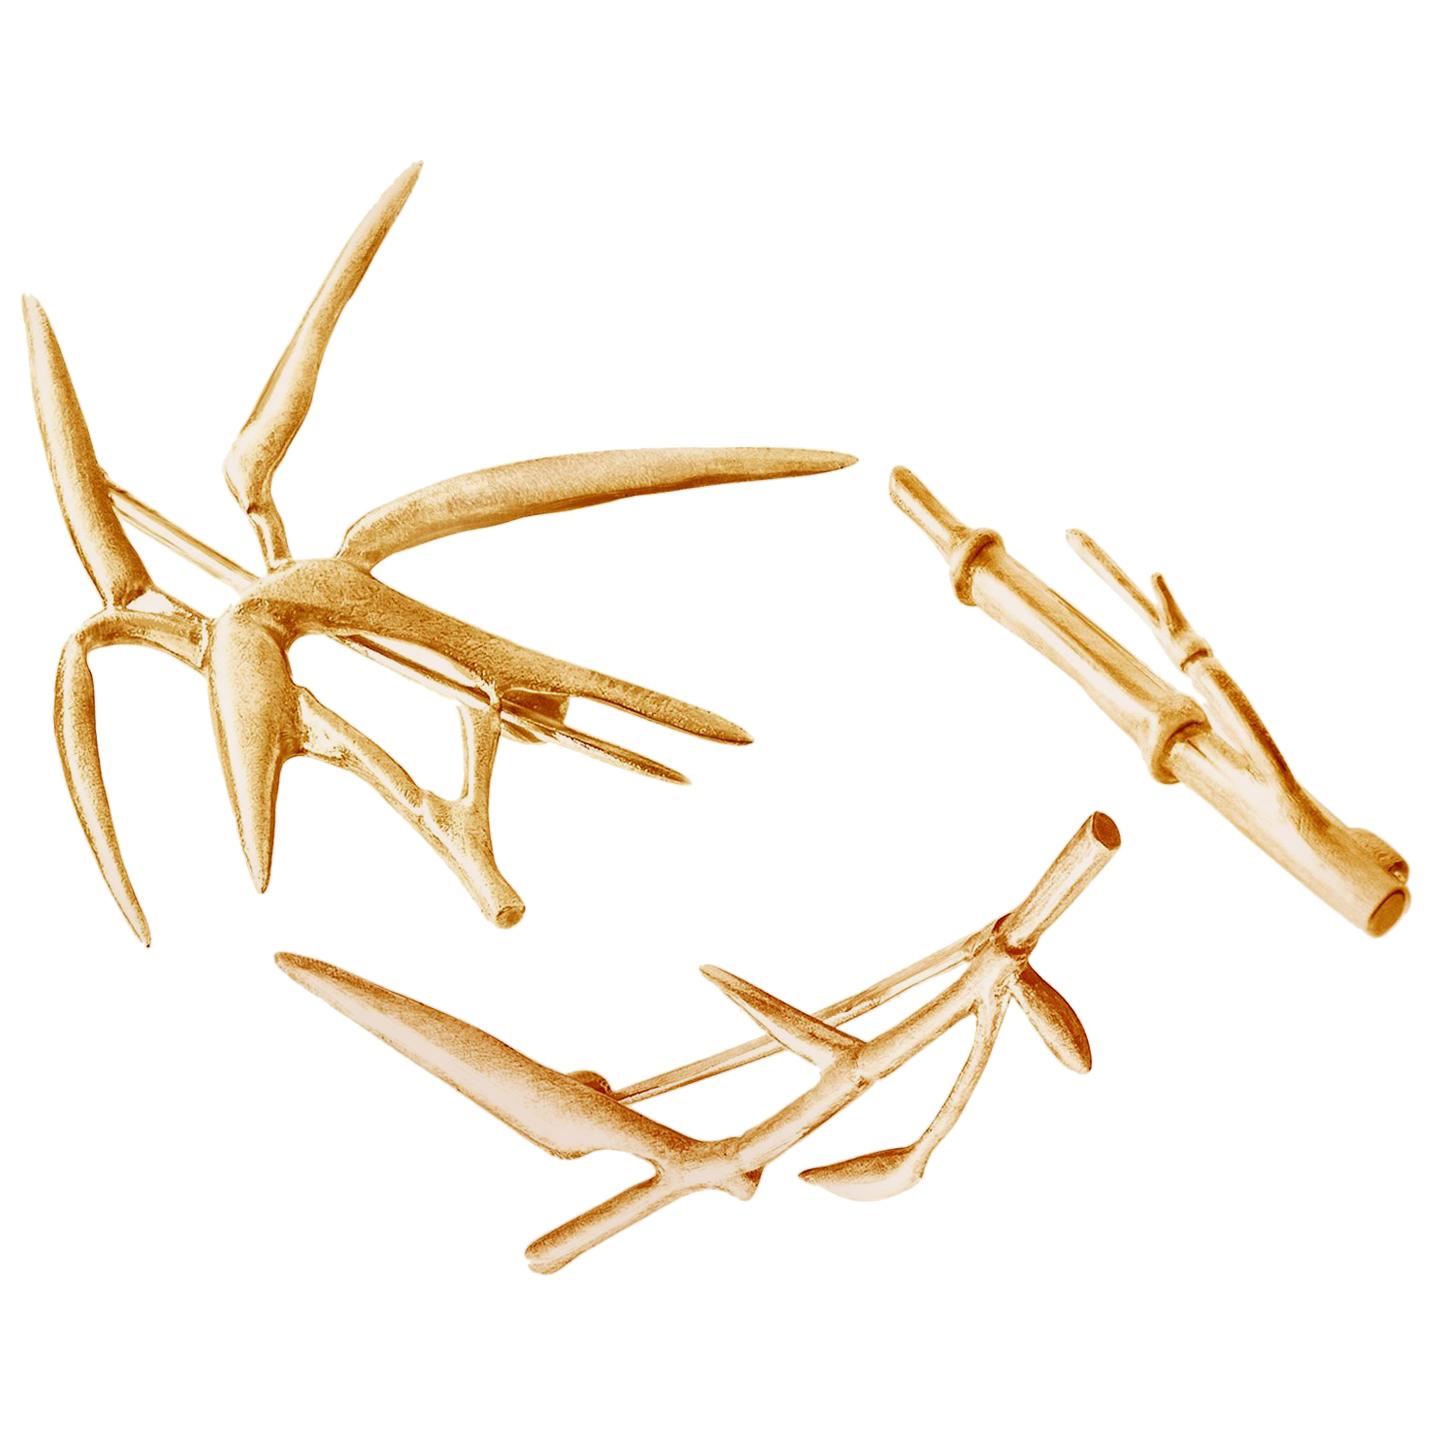 Featured in Vogue Designer Rose Gold Contemporary Bamboo Brooches Triptych